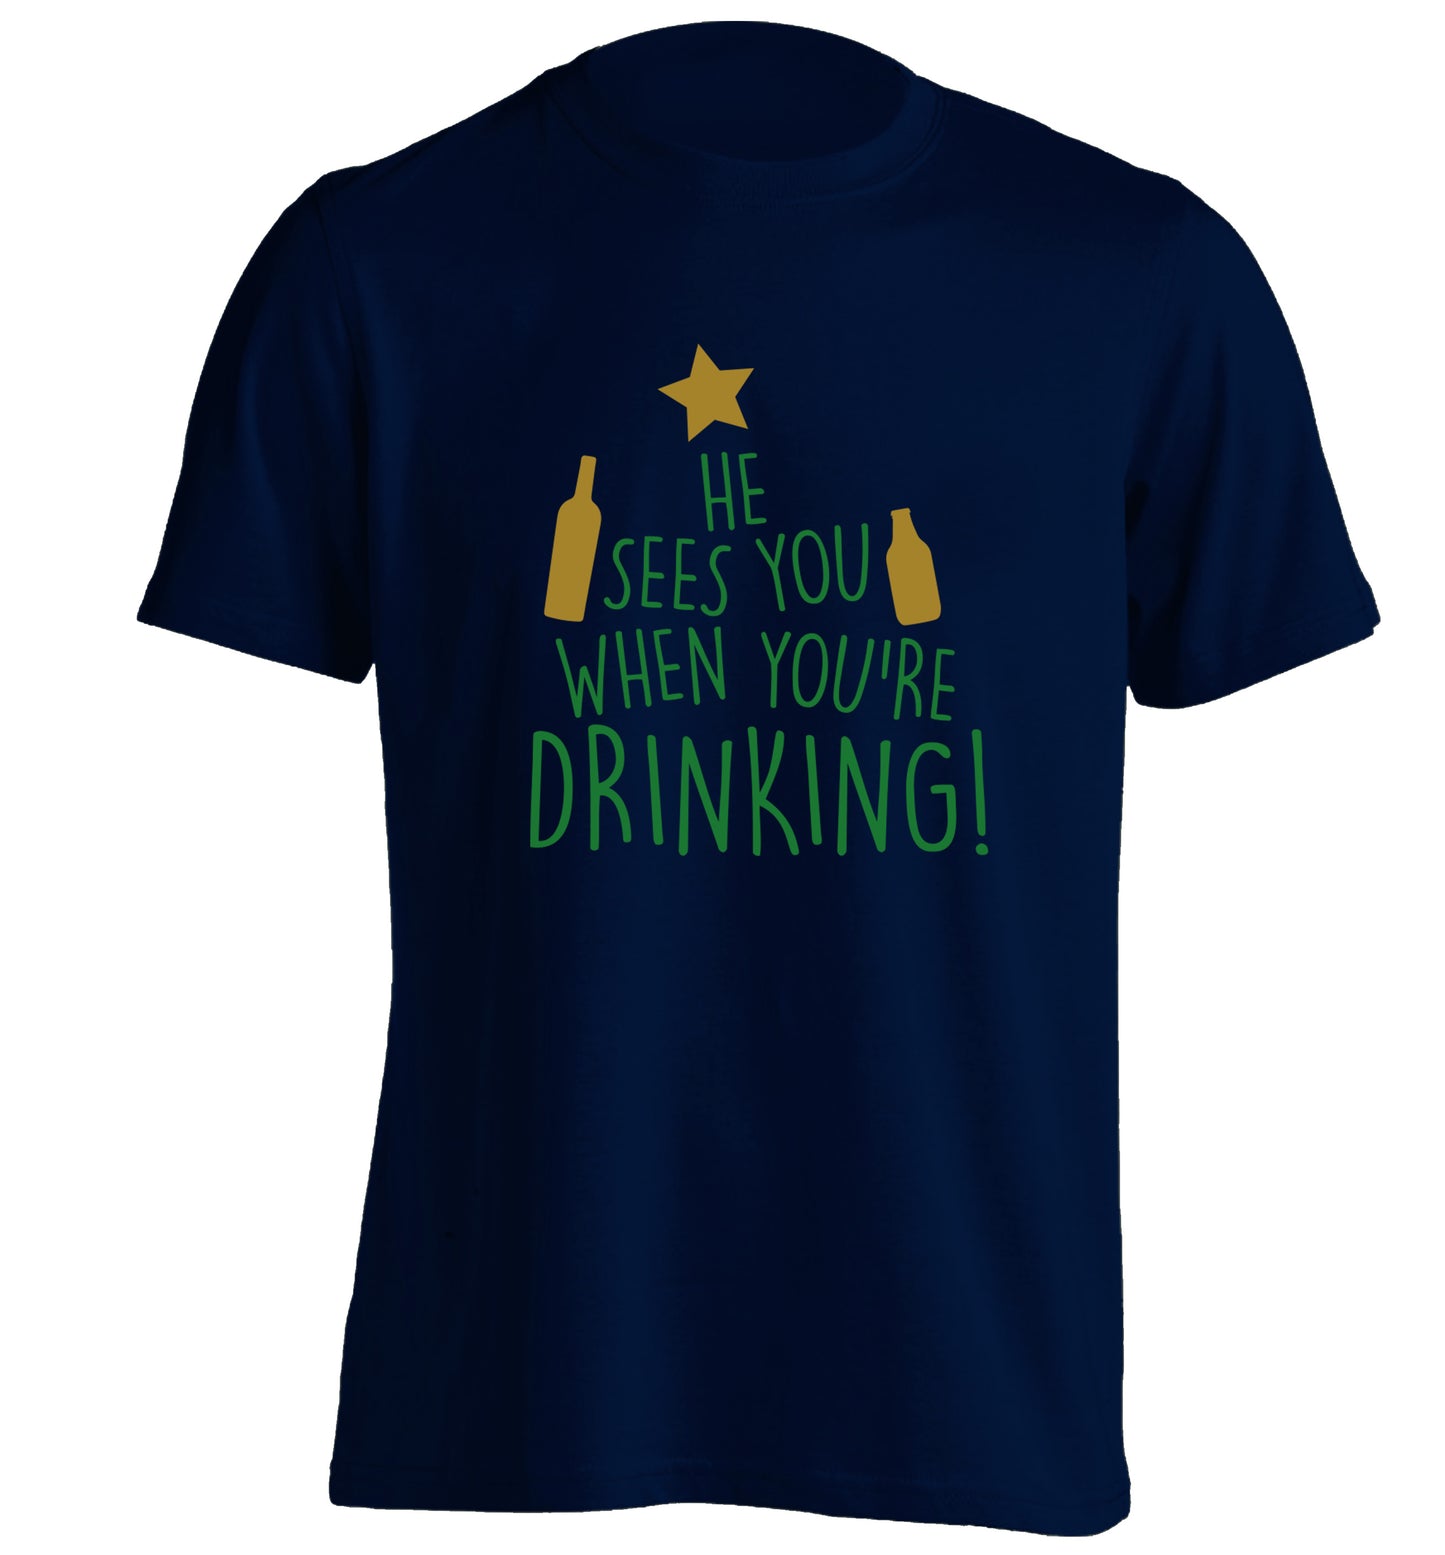 He sees you when you're drinking adults unisex navy Tshirt 2XL